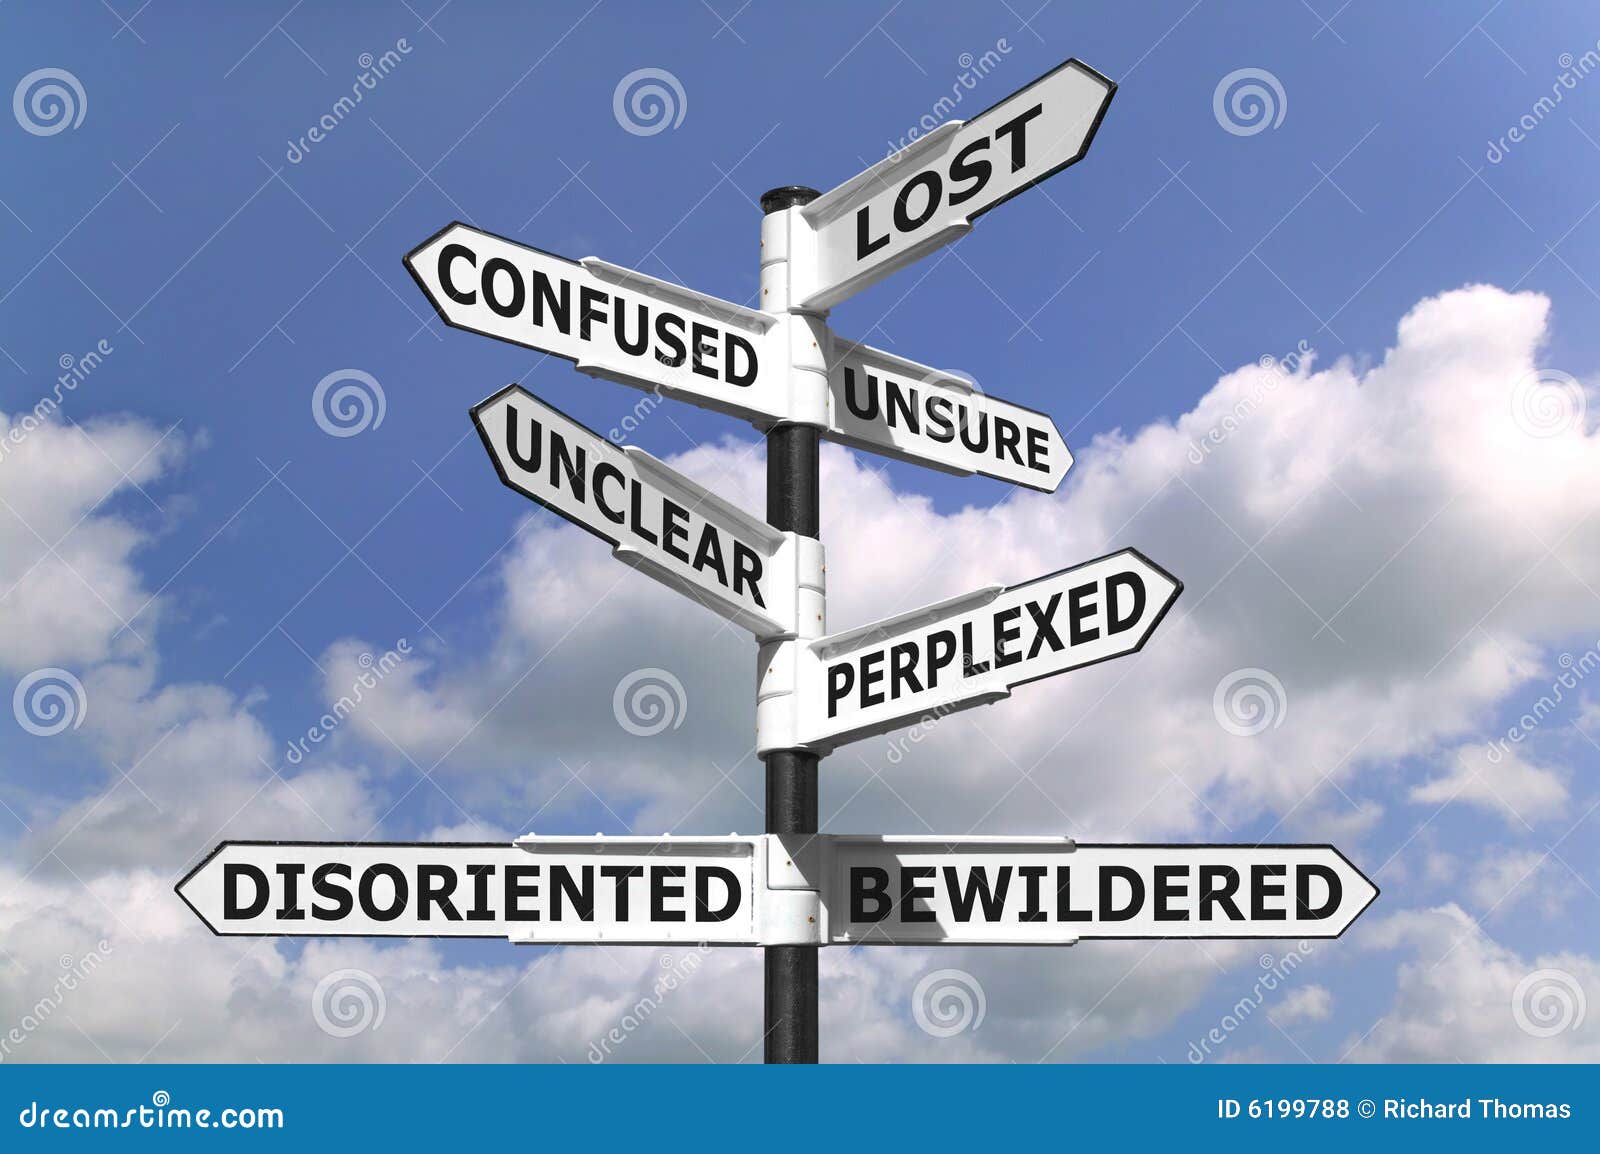 lost and confused signpost